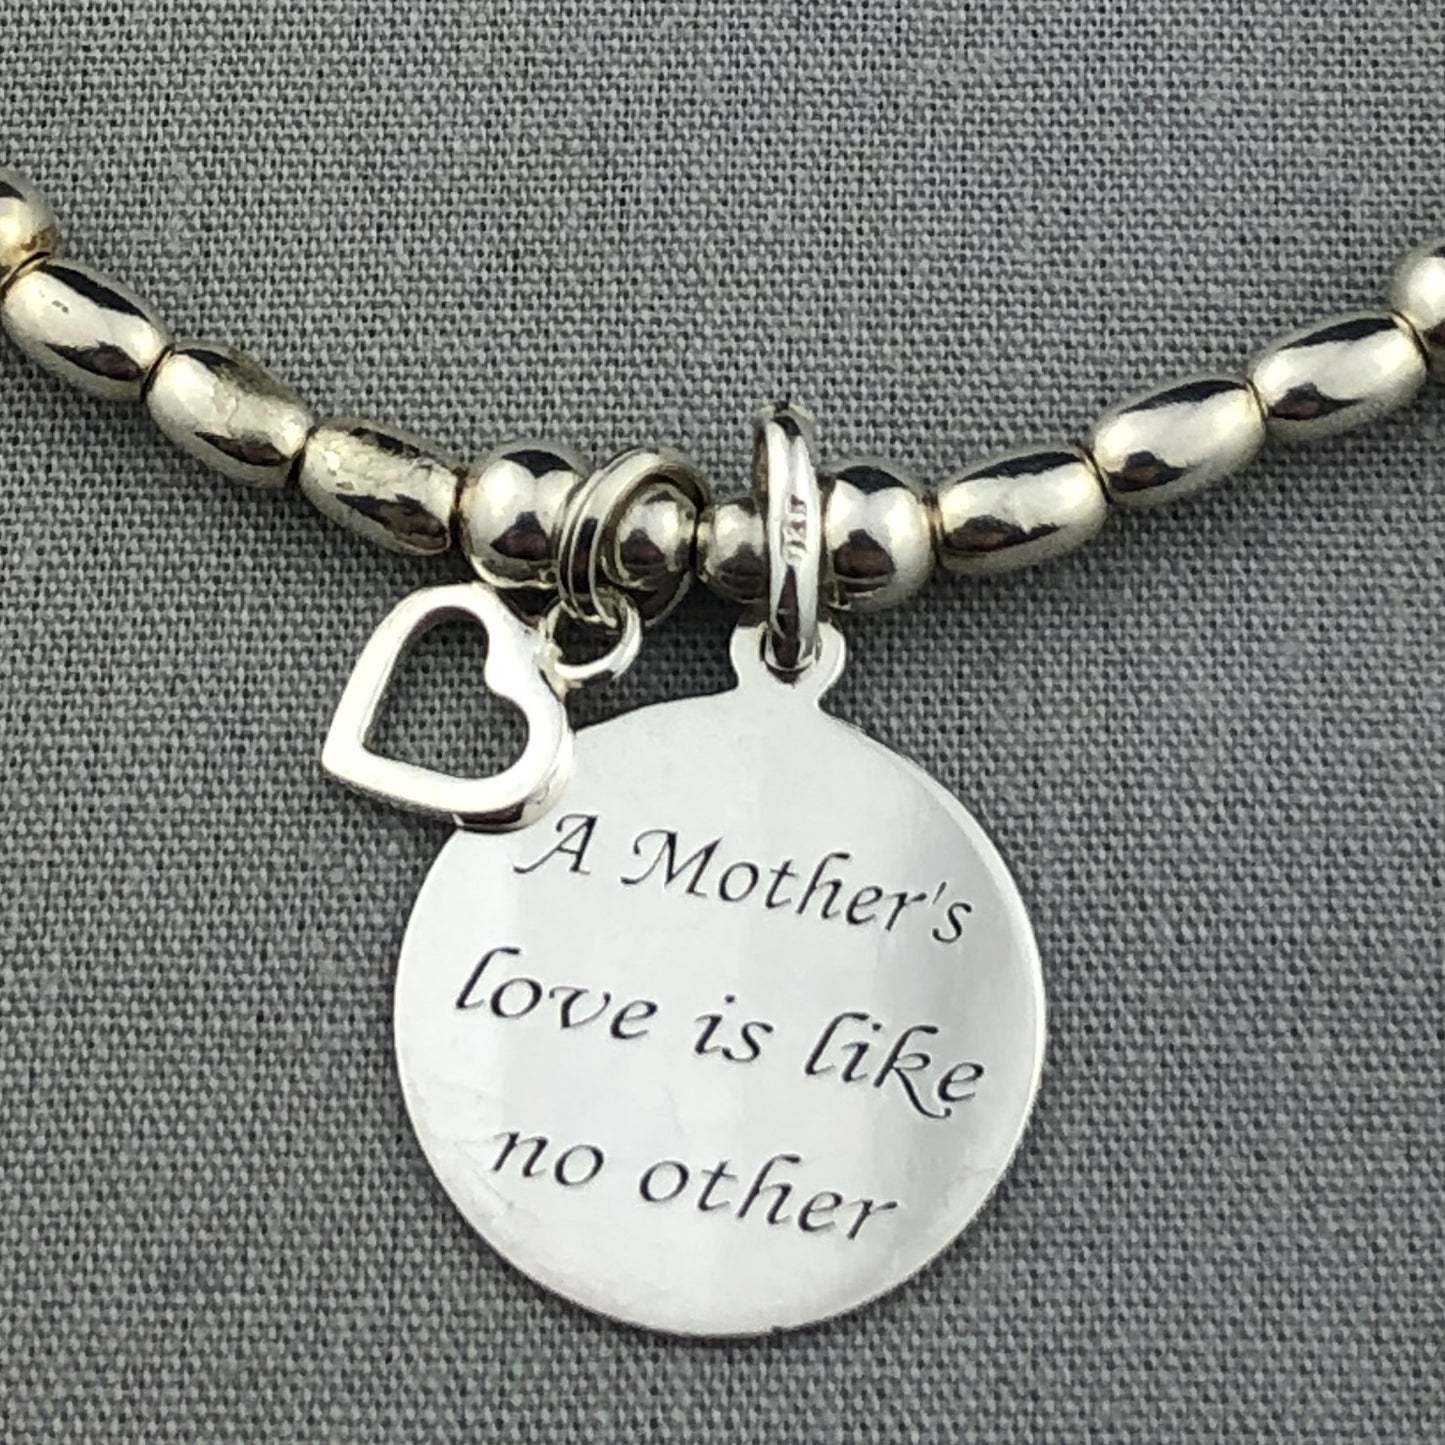 Closeup of "Mother's Love is Like No Other" sterling silver hand-made women's stacking charm bracelet by My Silver Wish